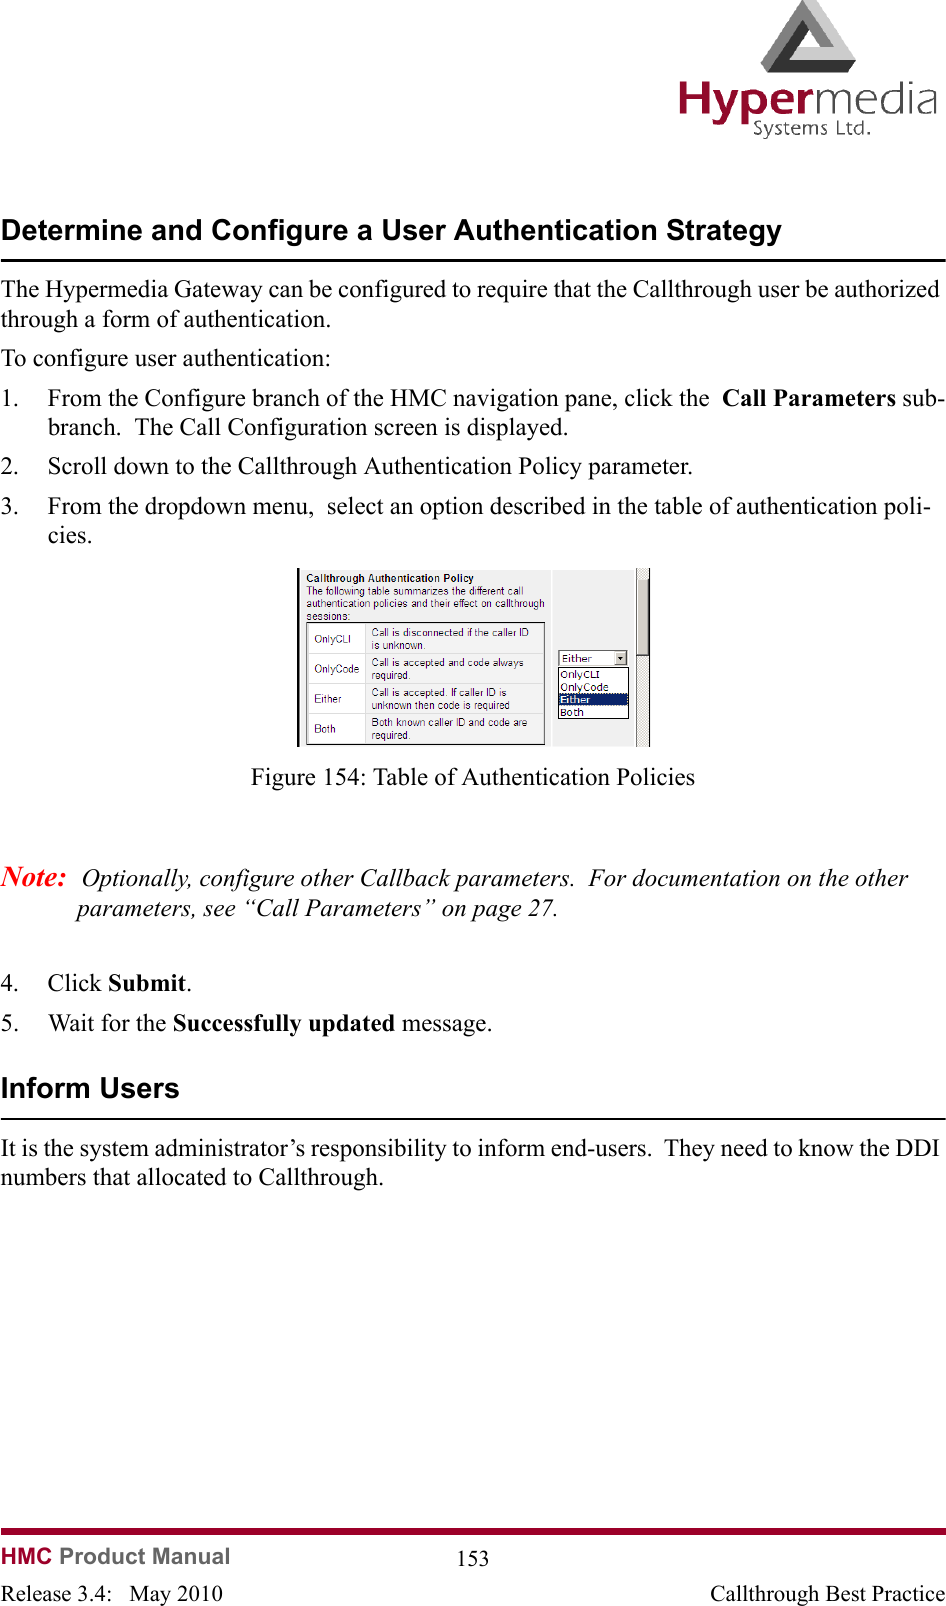 HMC Product Manual  153Release 3.4:   May 2010 Callthrough Best PracticeDetermine and Configure a User Authentication StrategyThe Hypermedia Gateway can be configured to require that the Callthrough user be authorized through a form of authentication.To configure user authentication:1. From the Configure branch of the HMC navigation pane, click the  Call Parameters sub-branch.  The Call Configuration screen is displayed.2. Scroll down to the Callthrough Authentication Policy parameter.3. From the dropdown menu,  select an option described in the table of authentication poli-cies.              Figure 154: Table of Authentication PoliciesNote:  Optionally, configure other Callback parameters.  For documentation on the other parameters, see “Call Parameters” on page 27.4. Click Submit.  5. Wait for the Successfully updated message.Inform Users It is the system administrator’s responsibility to inform end-users.  They need to know the DDI numbers that allocated to Callthrough.